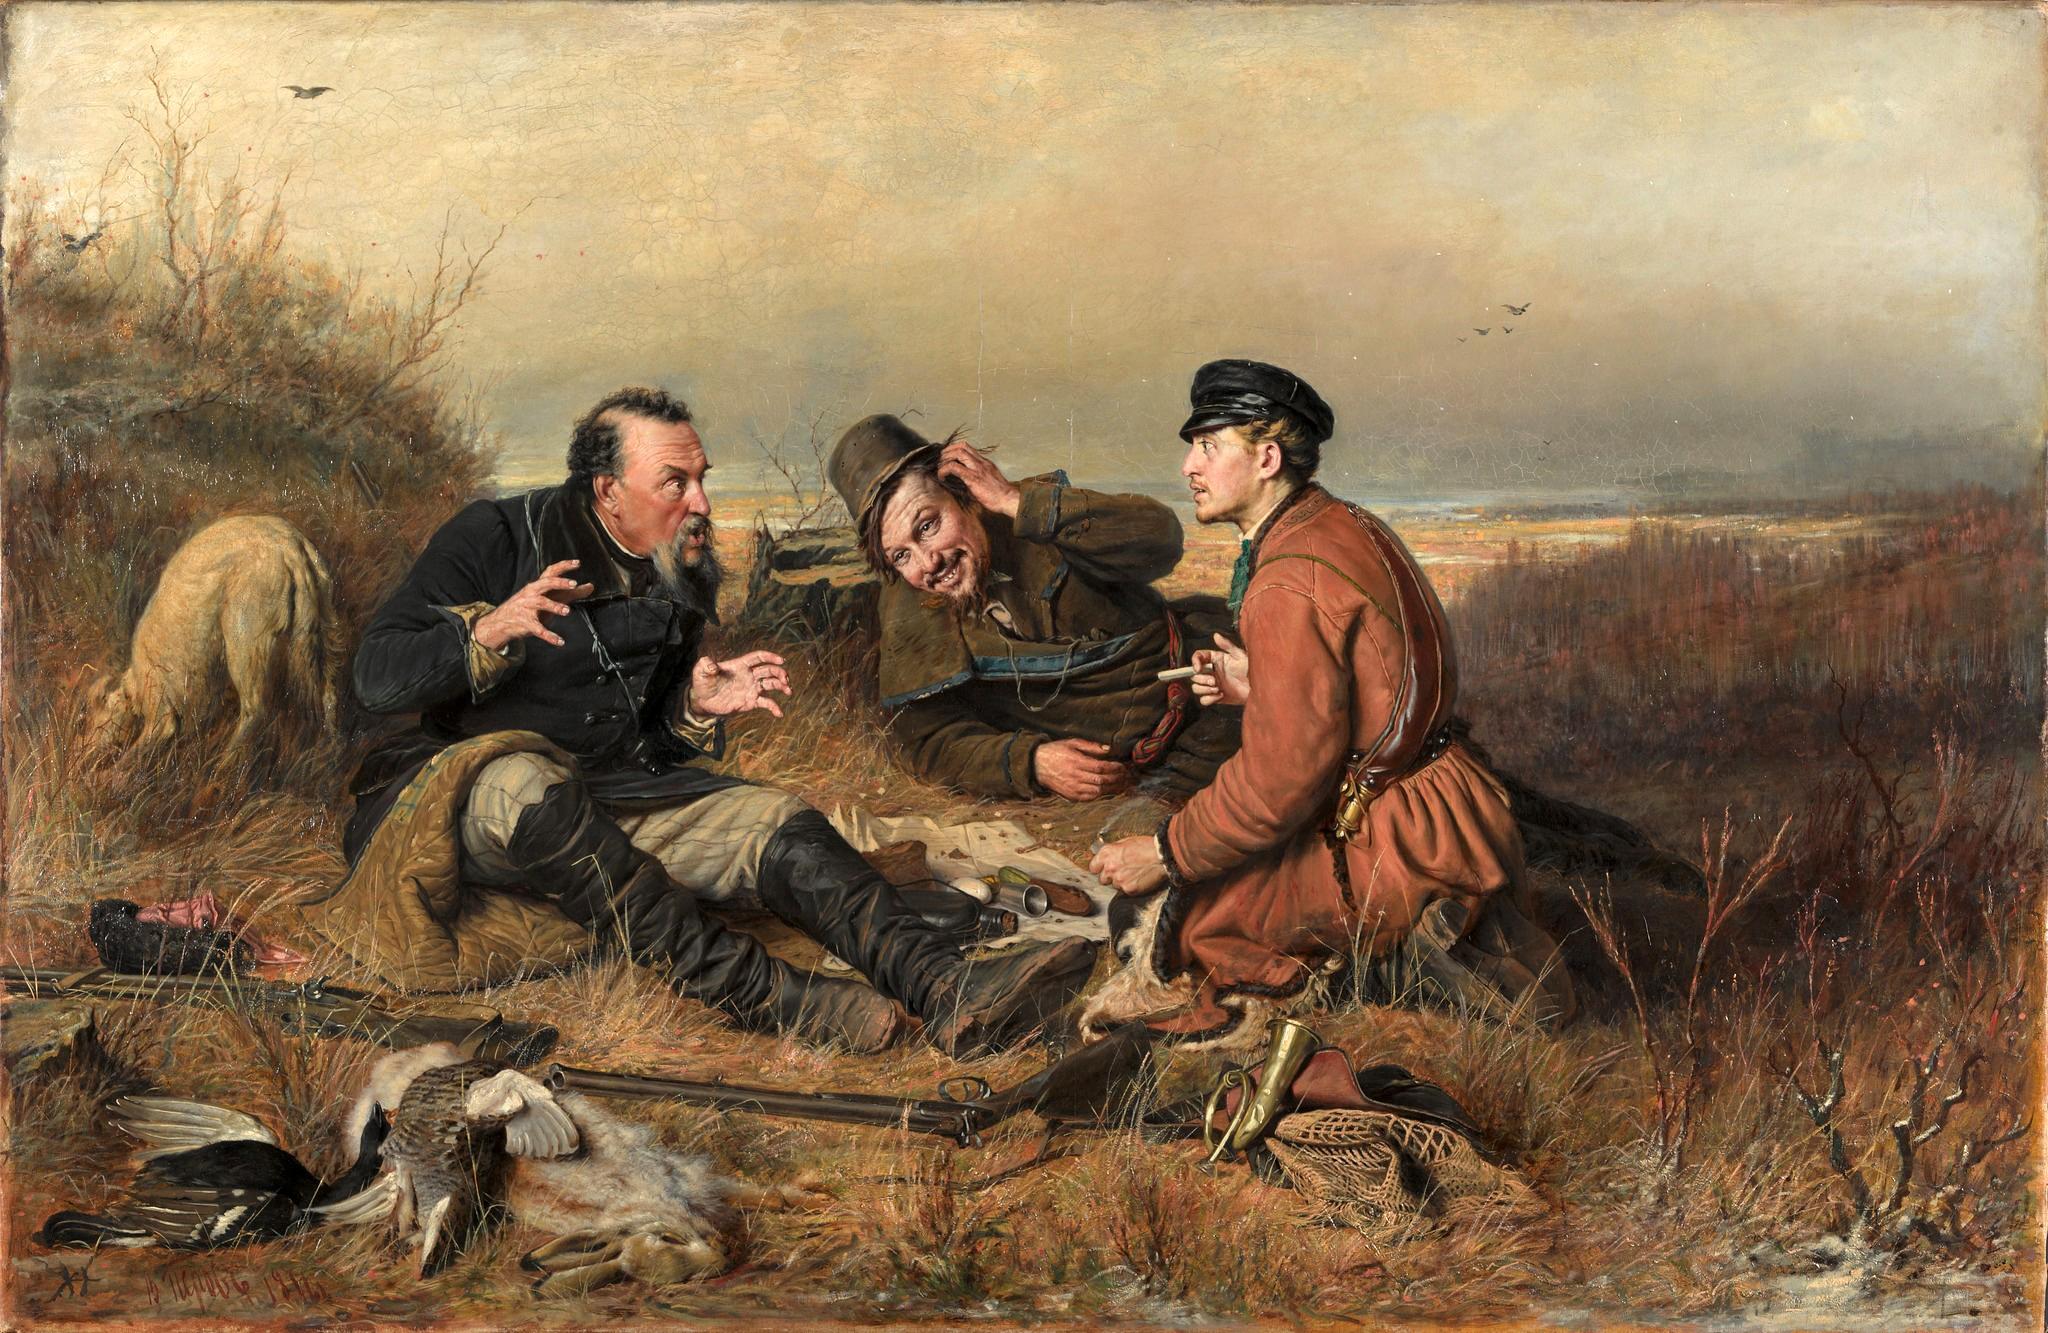 Hunters at rest, Wassili Grigorjewitsch Perow, 1871, Oil on canvas.jpg